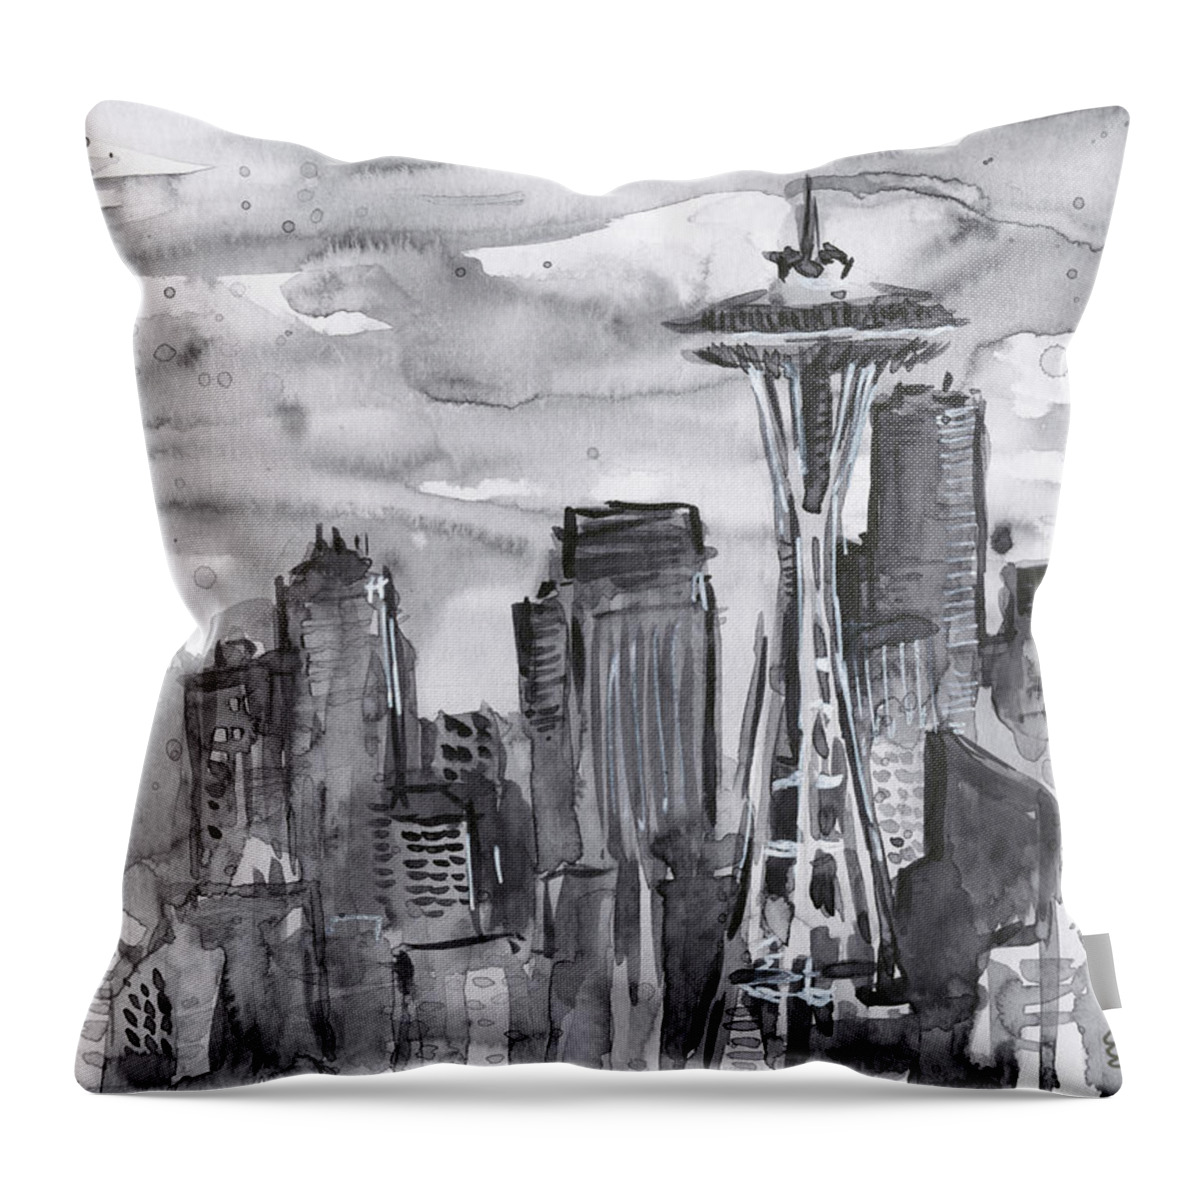 Seattle Throw Pillow featuring the painting Seattle Skyline Space Needle by Olga Shvartsur